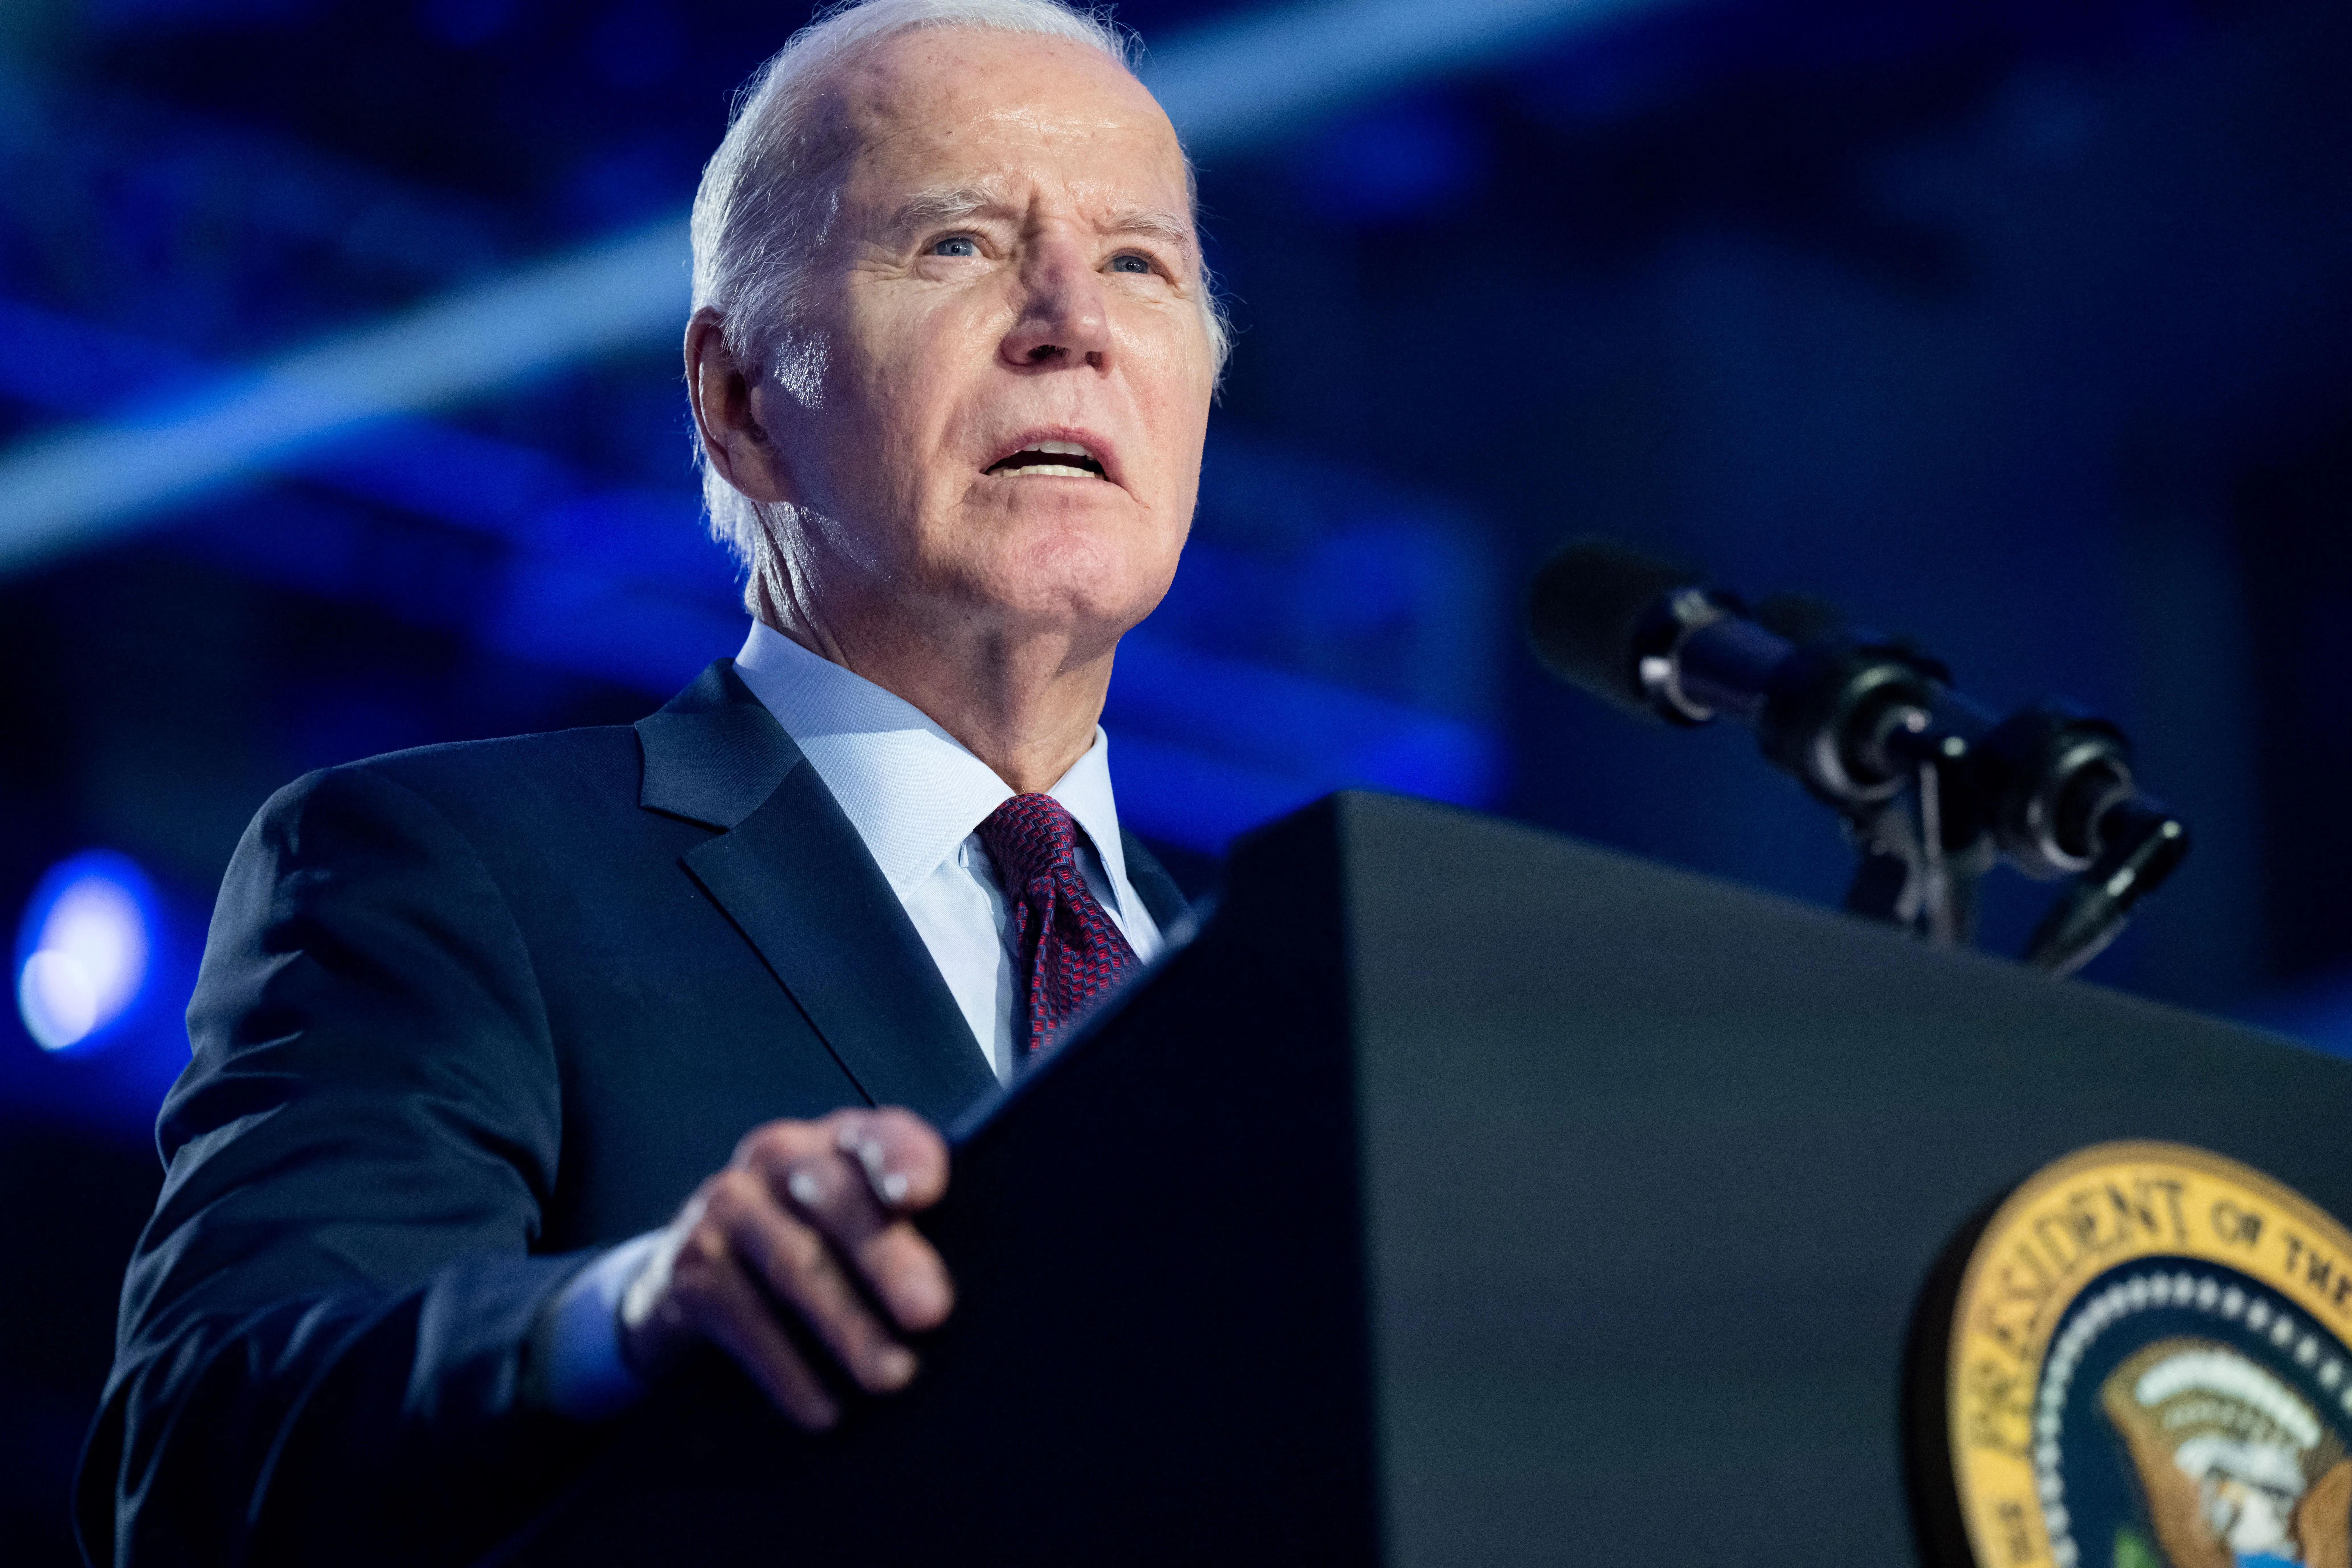 LIVE 6 PM ET: Biden Delivers Remarks at Campaign Event in Nevada